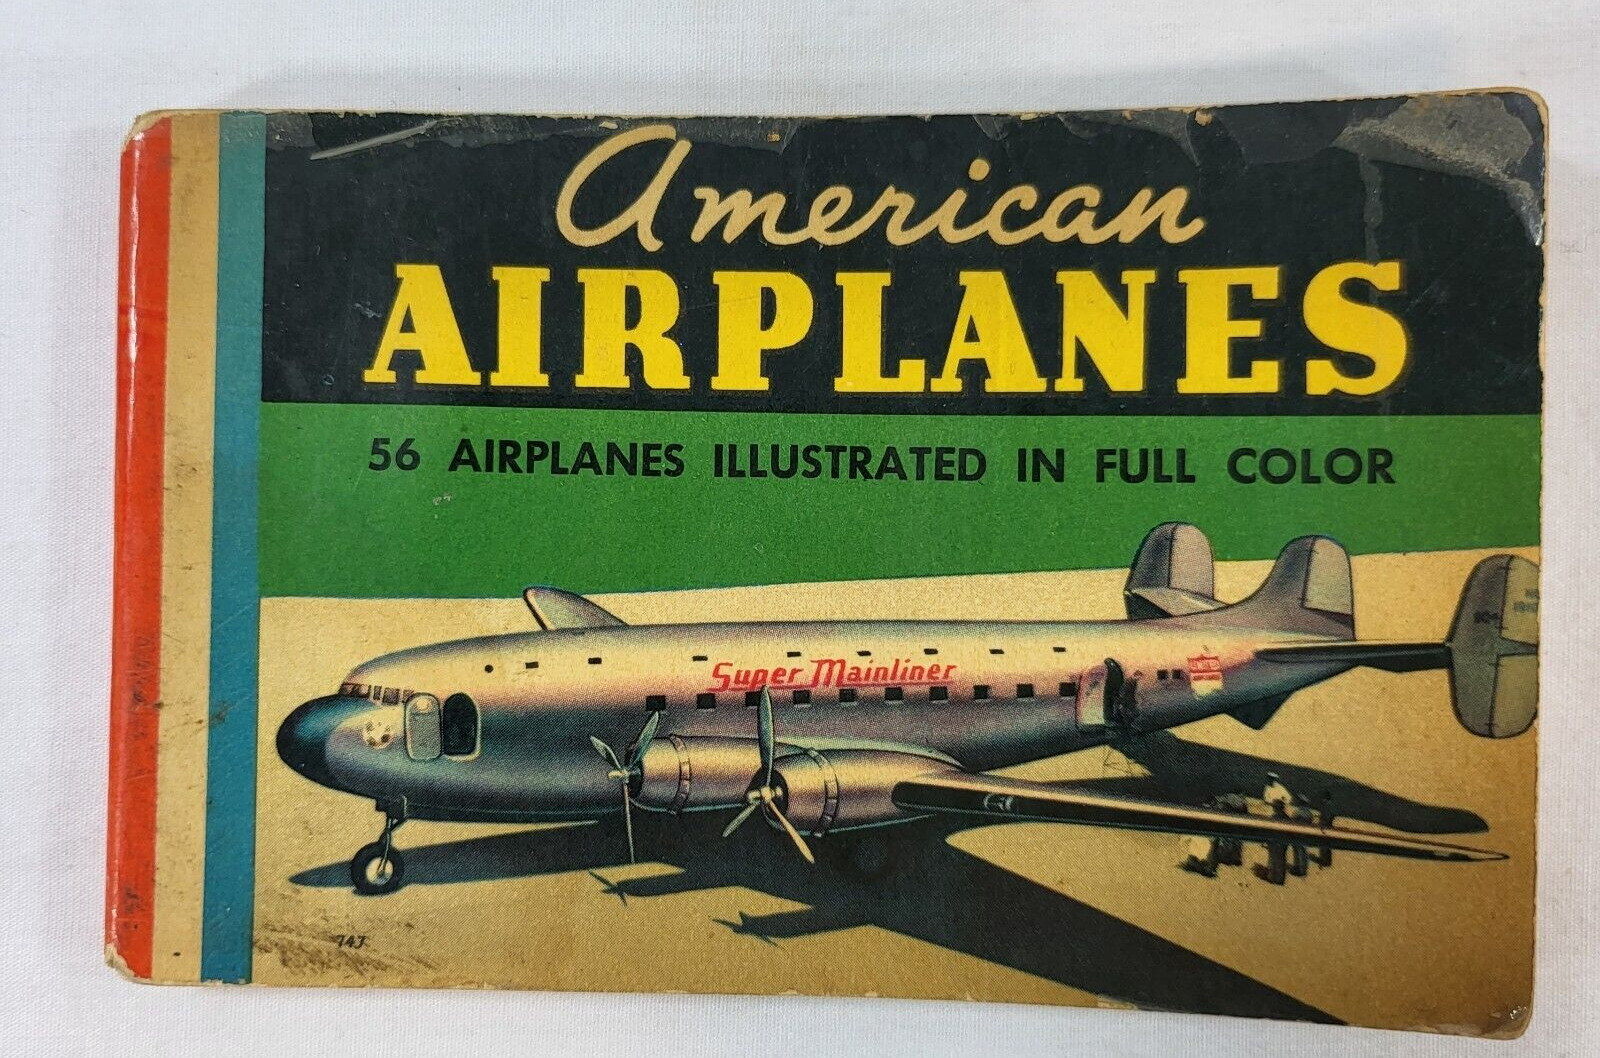 1940 American Airplanes - 56 Airplanes Illustrated In Full Color